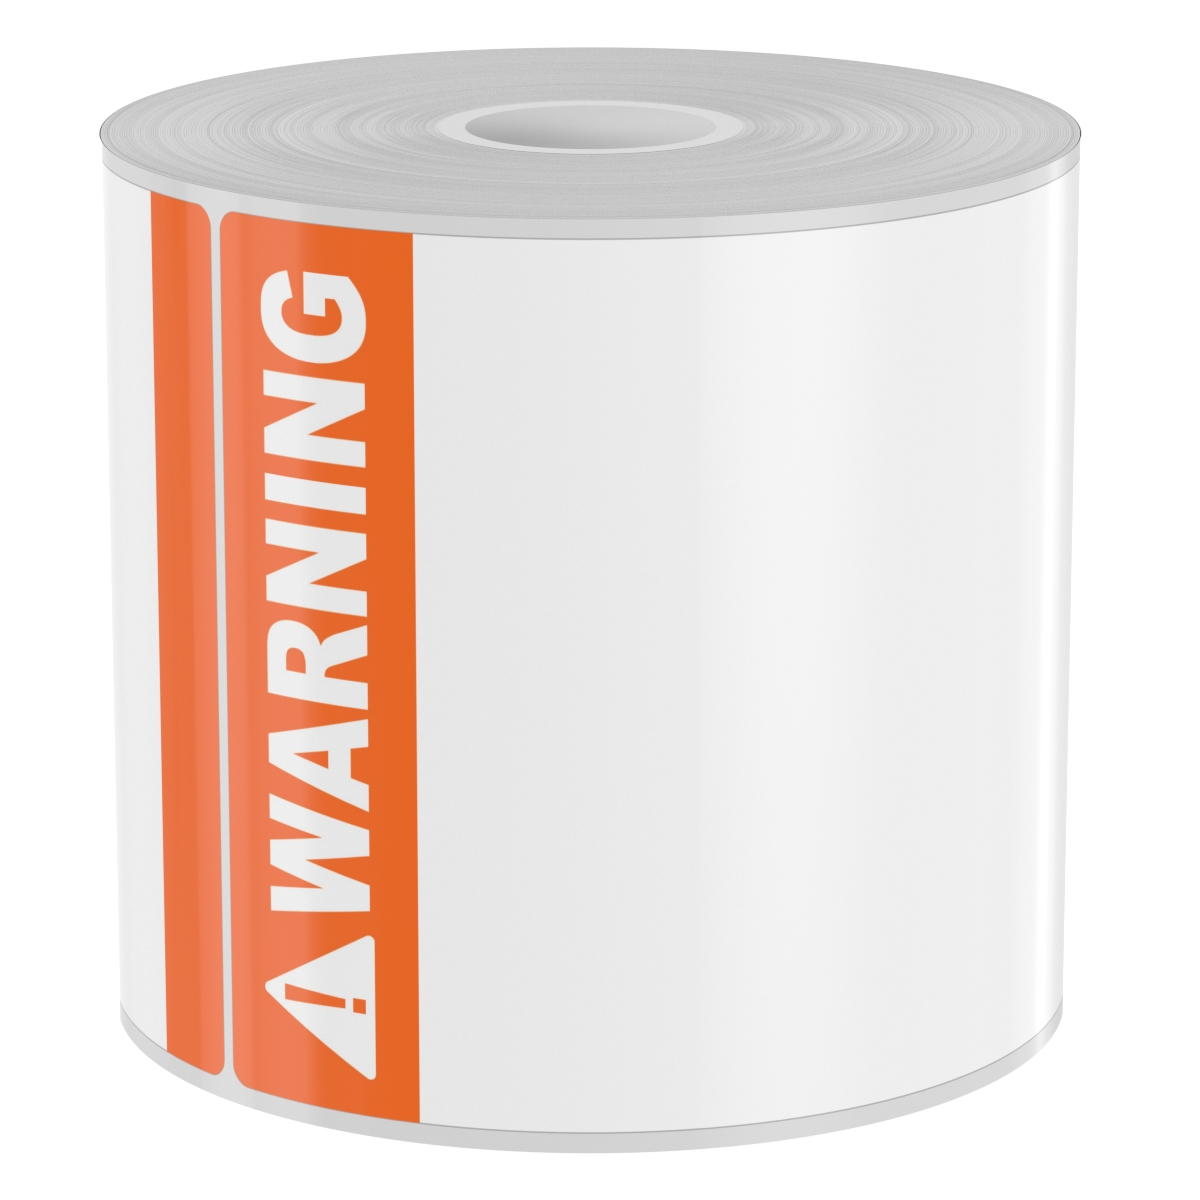 Detail view for 250 4" x 6" High-Performance Die-Cut Orange Double Band White Warning Portrait